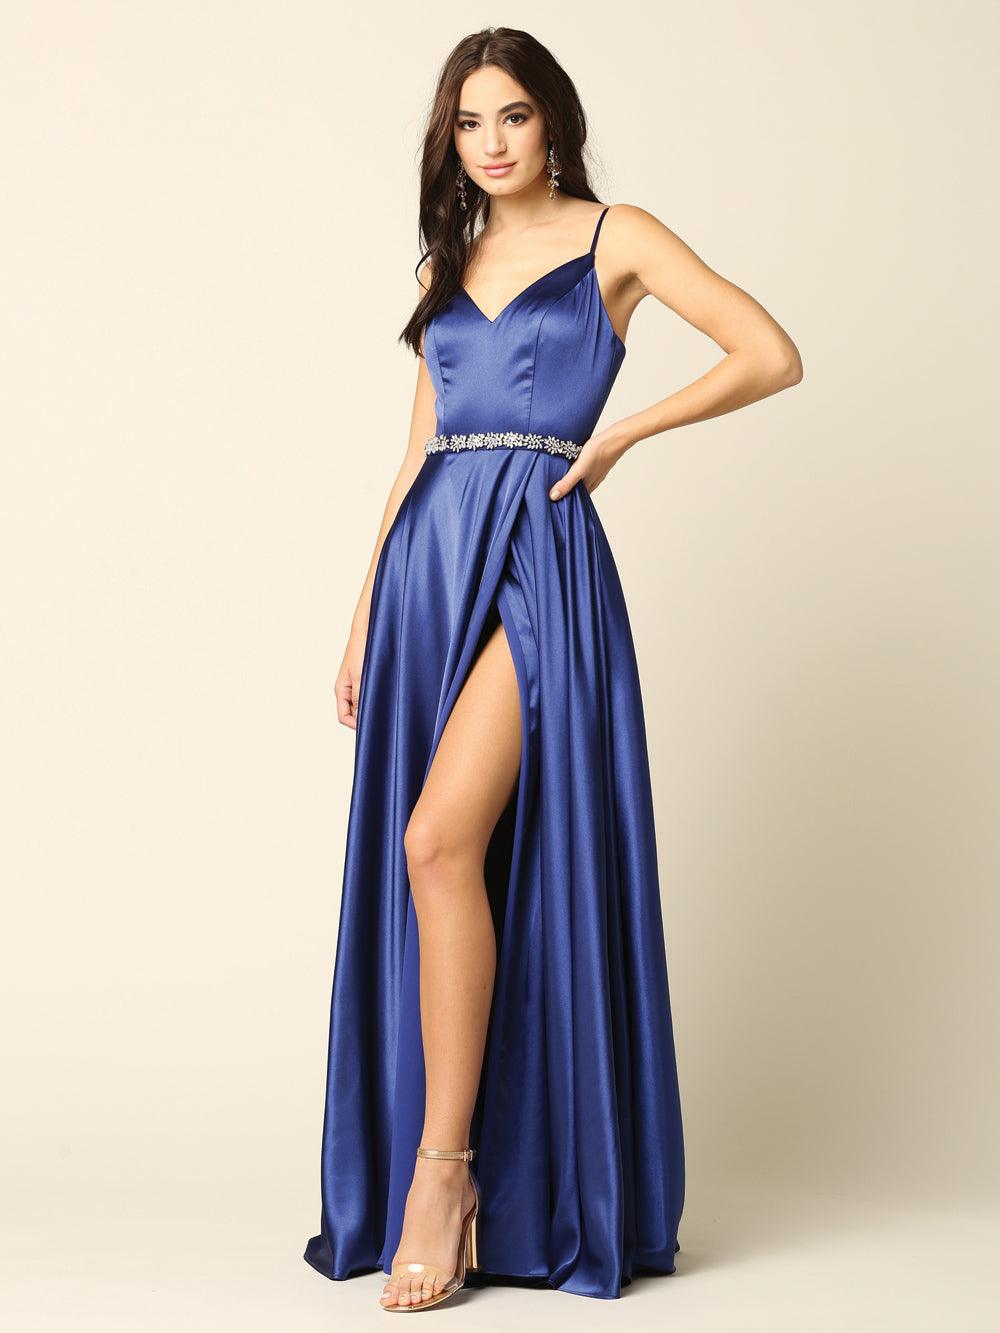 Long Formal Spaghetti Strap Bridesmaids Dress - The Dress Outlet